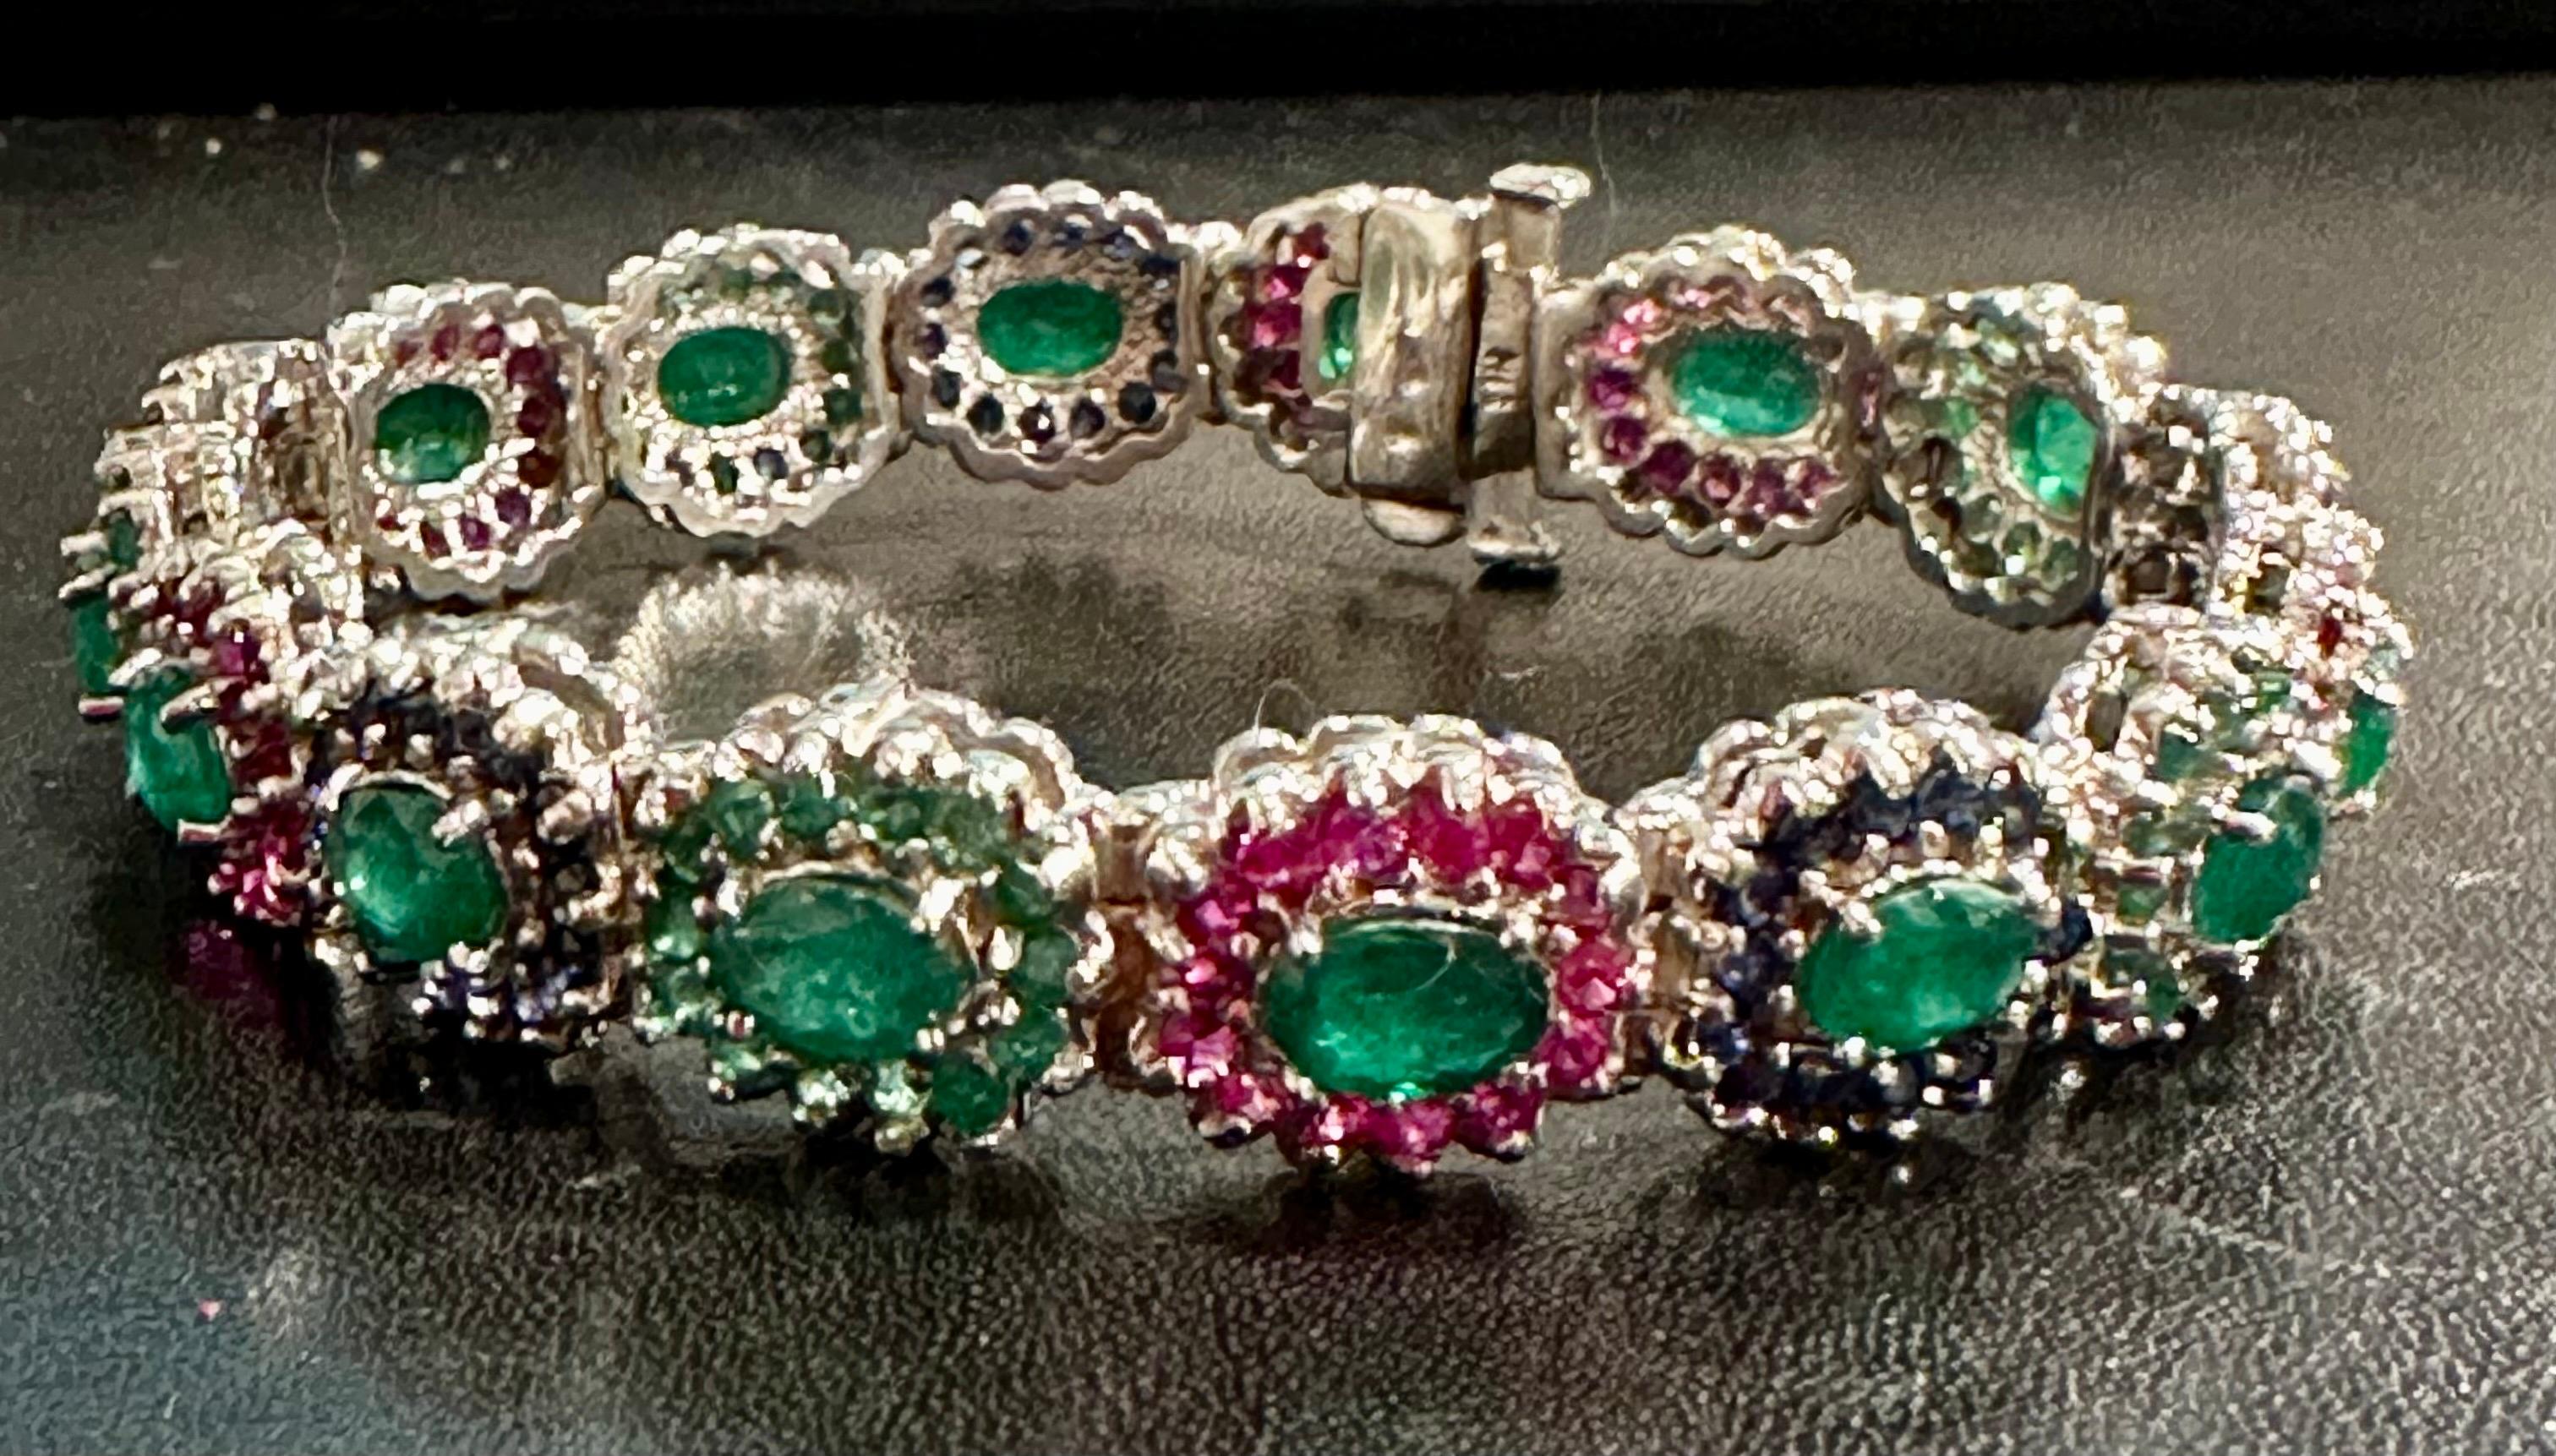 Approximately 8 Ct Oval Cut Emerald & Ruby & Sapphire Tennis Bracelet 14 Kt White Gold 25.6 Gm, 7.5 inch long
Other people are selling similar bracelet for double or triple the prices. I get shock by seeing those prices.
Please read my bracelet